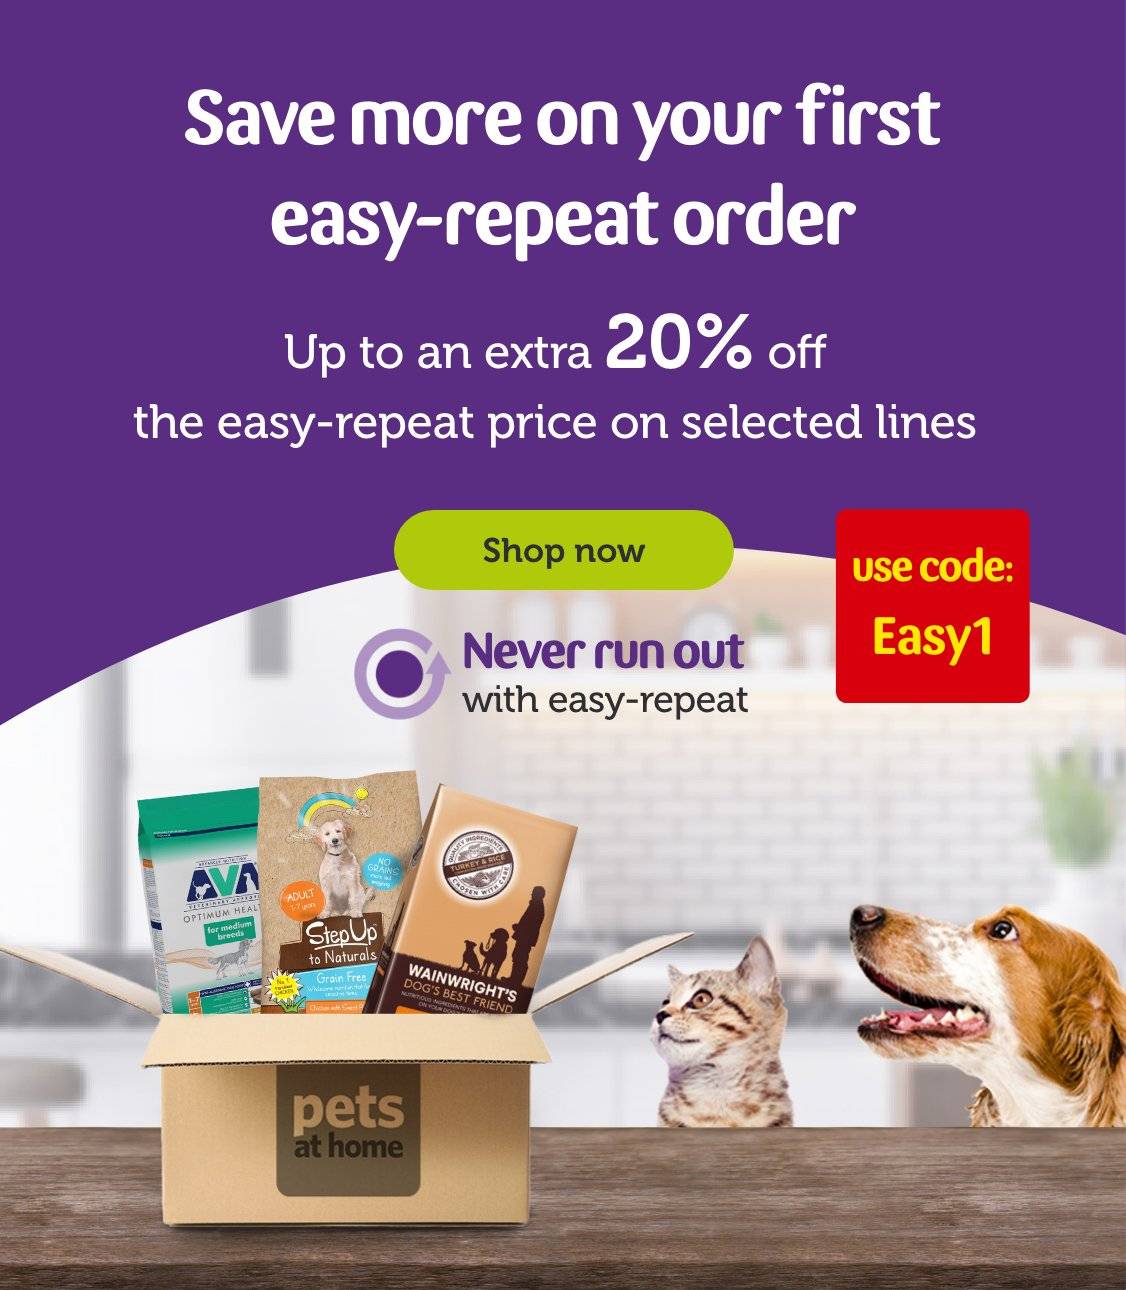 pets at home metrocentre